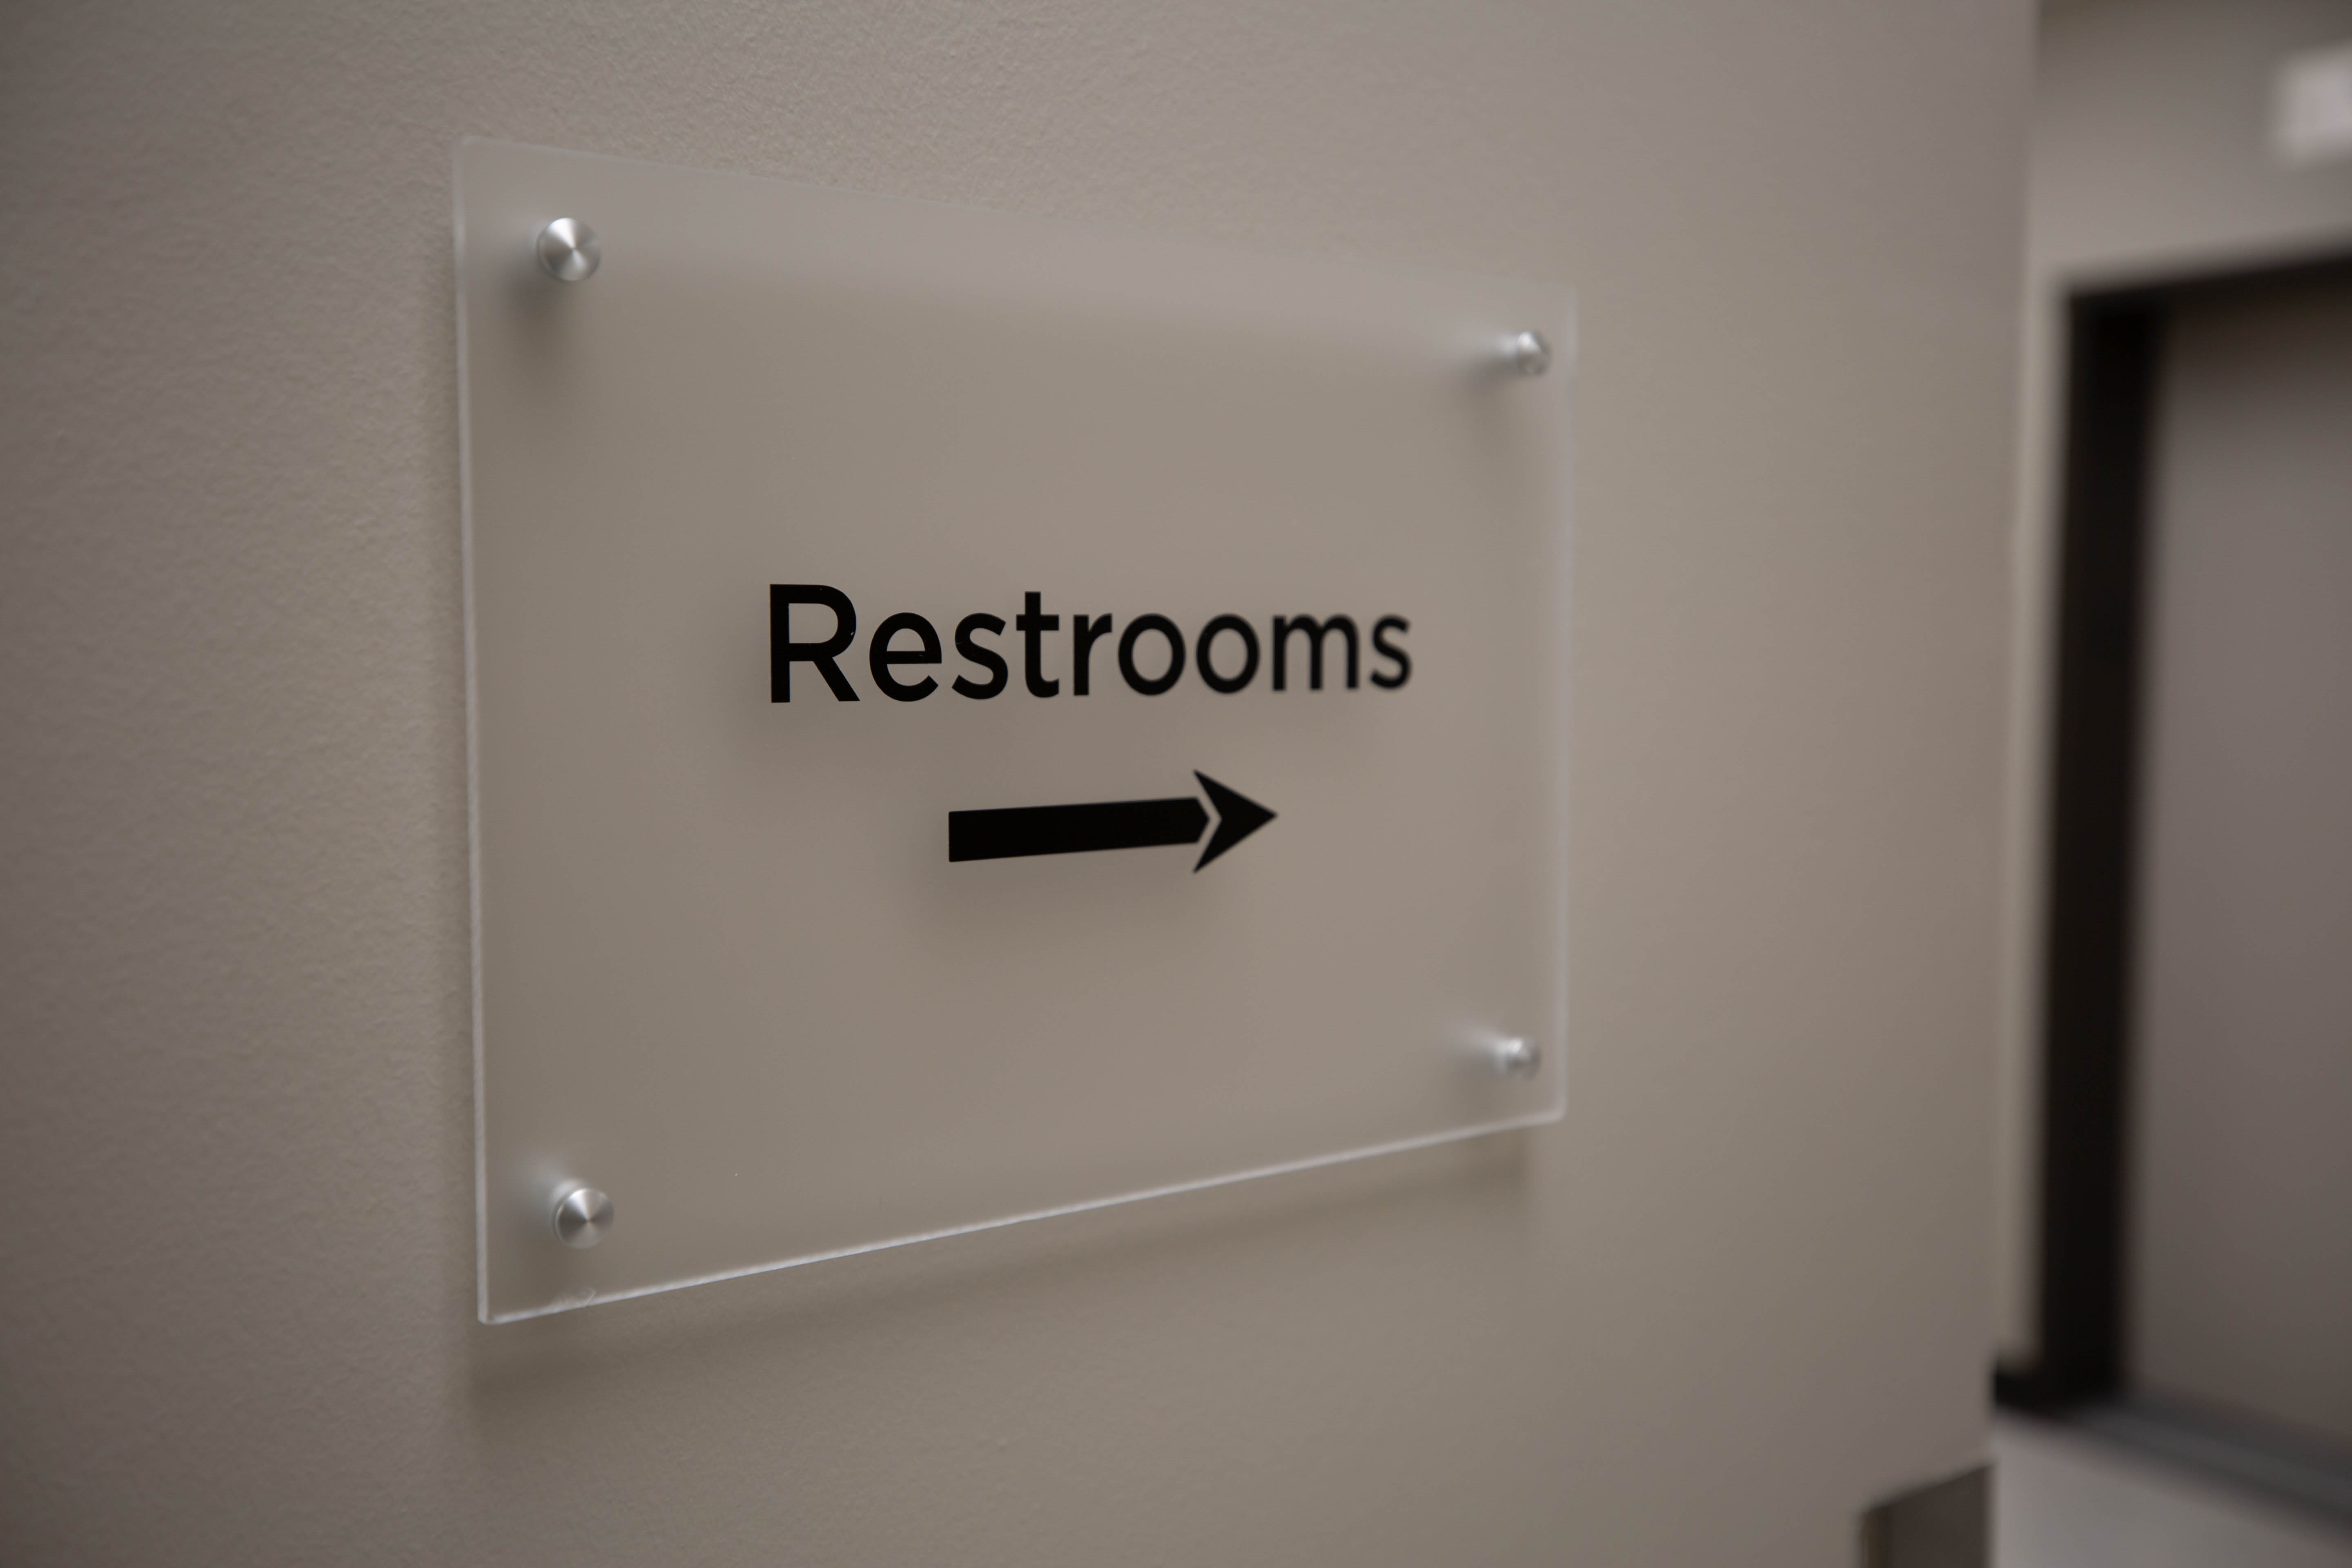 directional sign pointing to restrooms